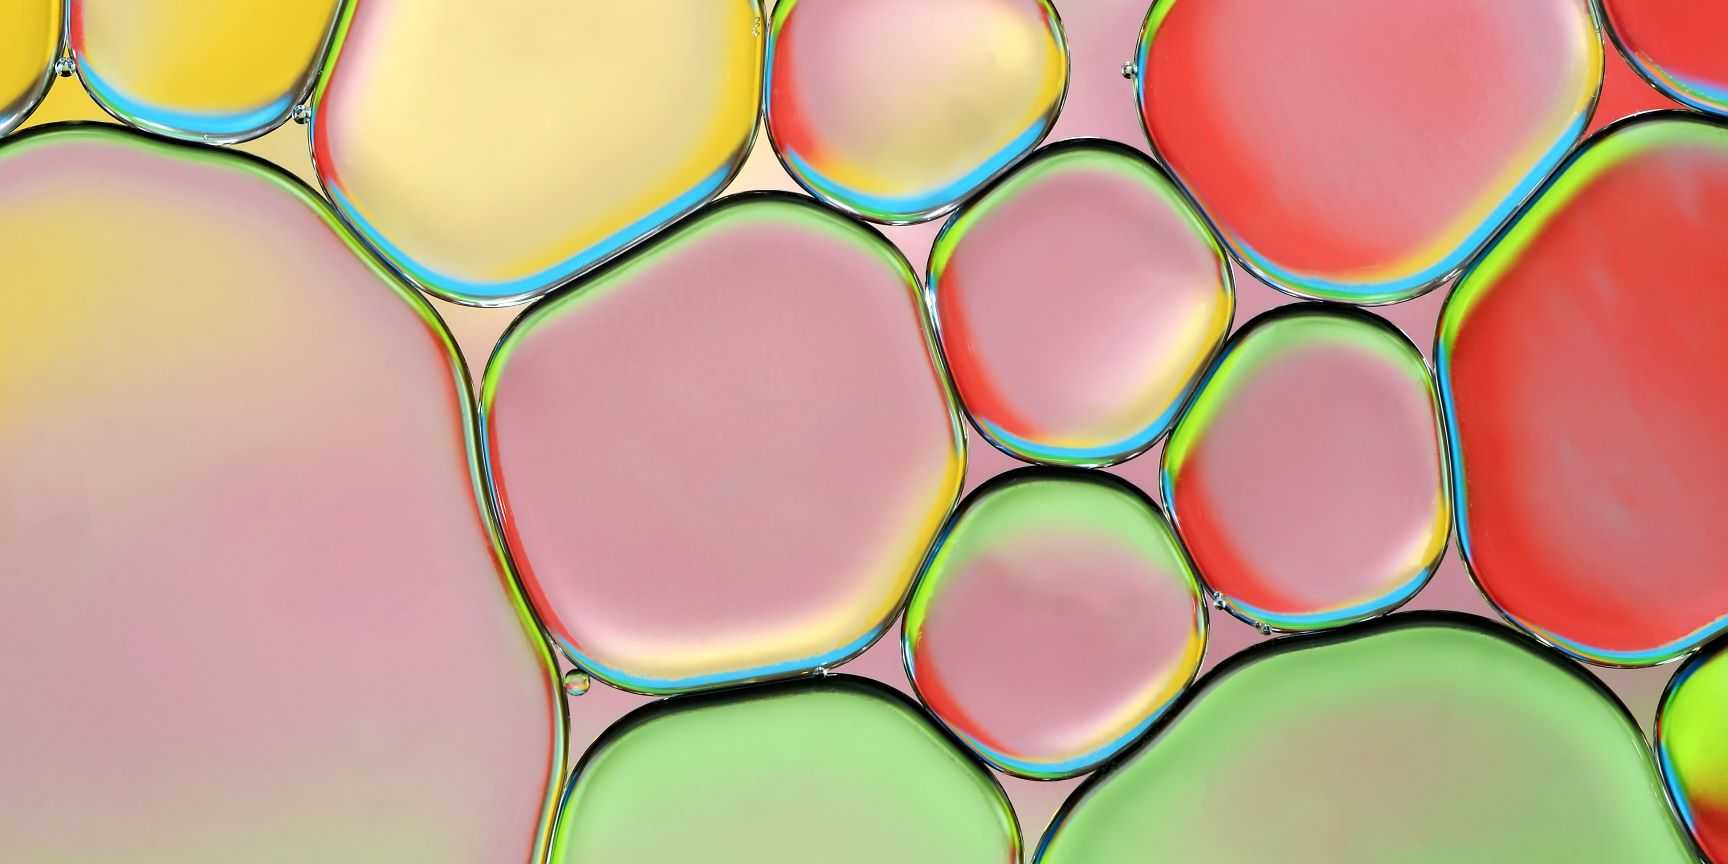 magnified image of hydrogel droplets